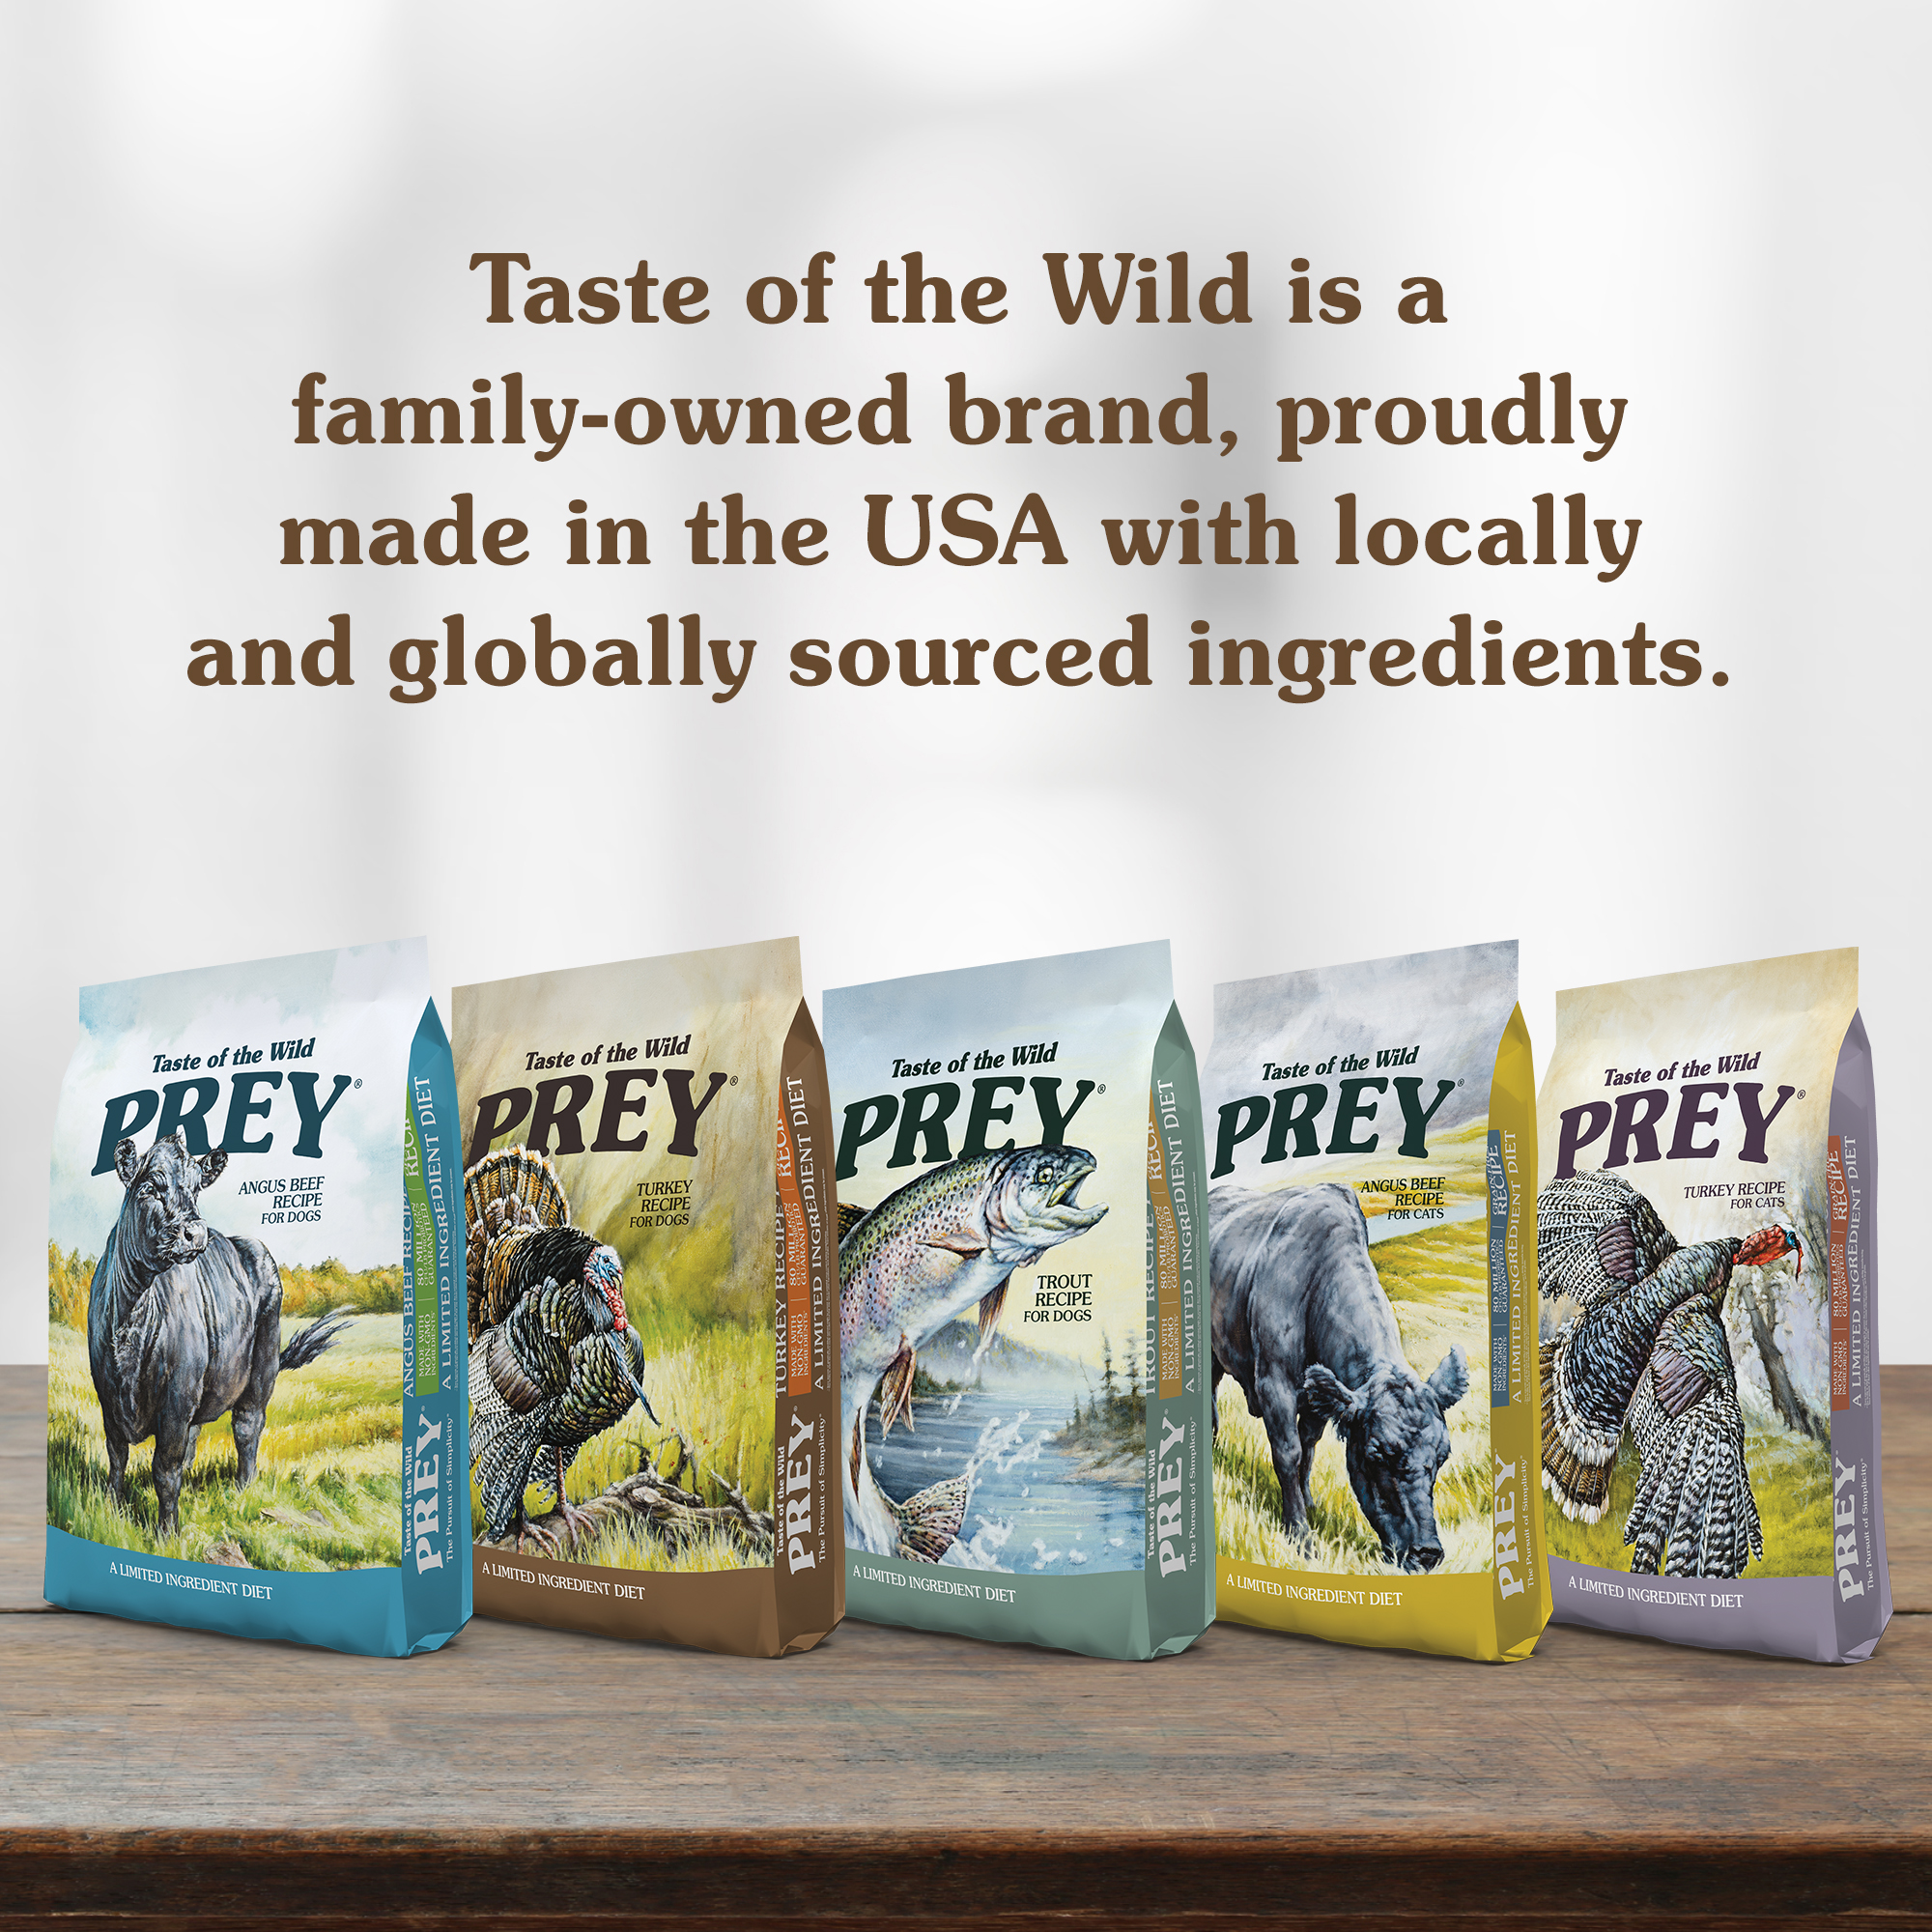 Assorted bags of Taste of the Wild Pet Food products.